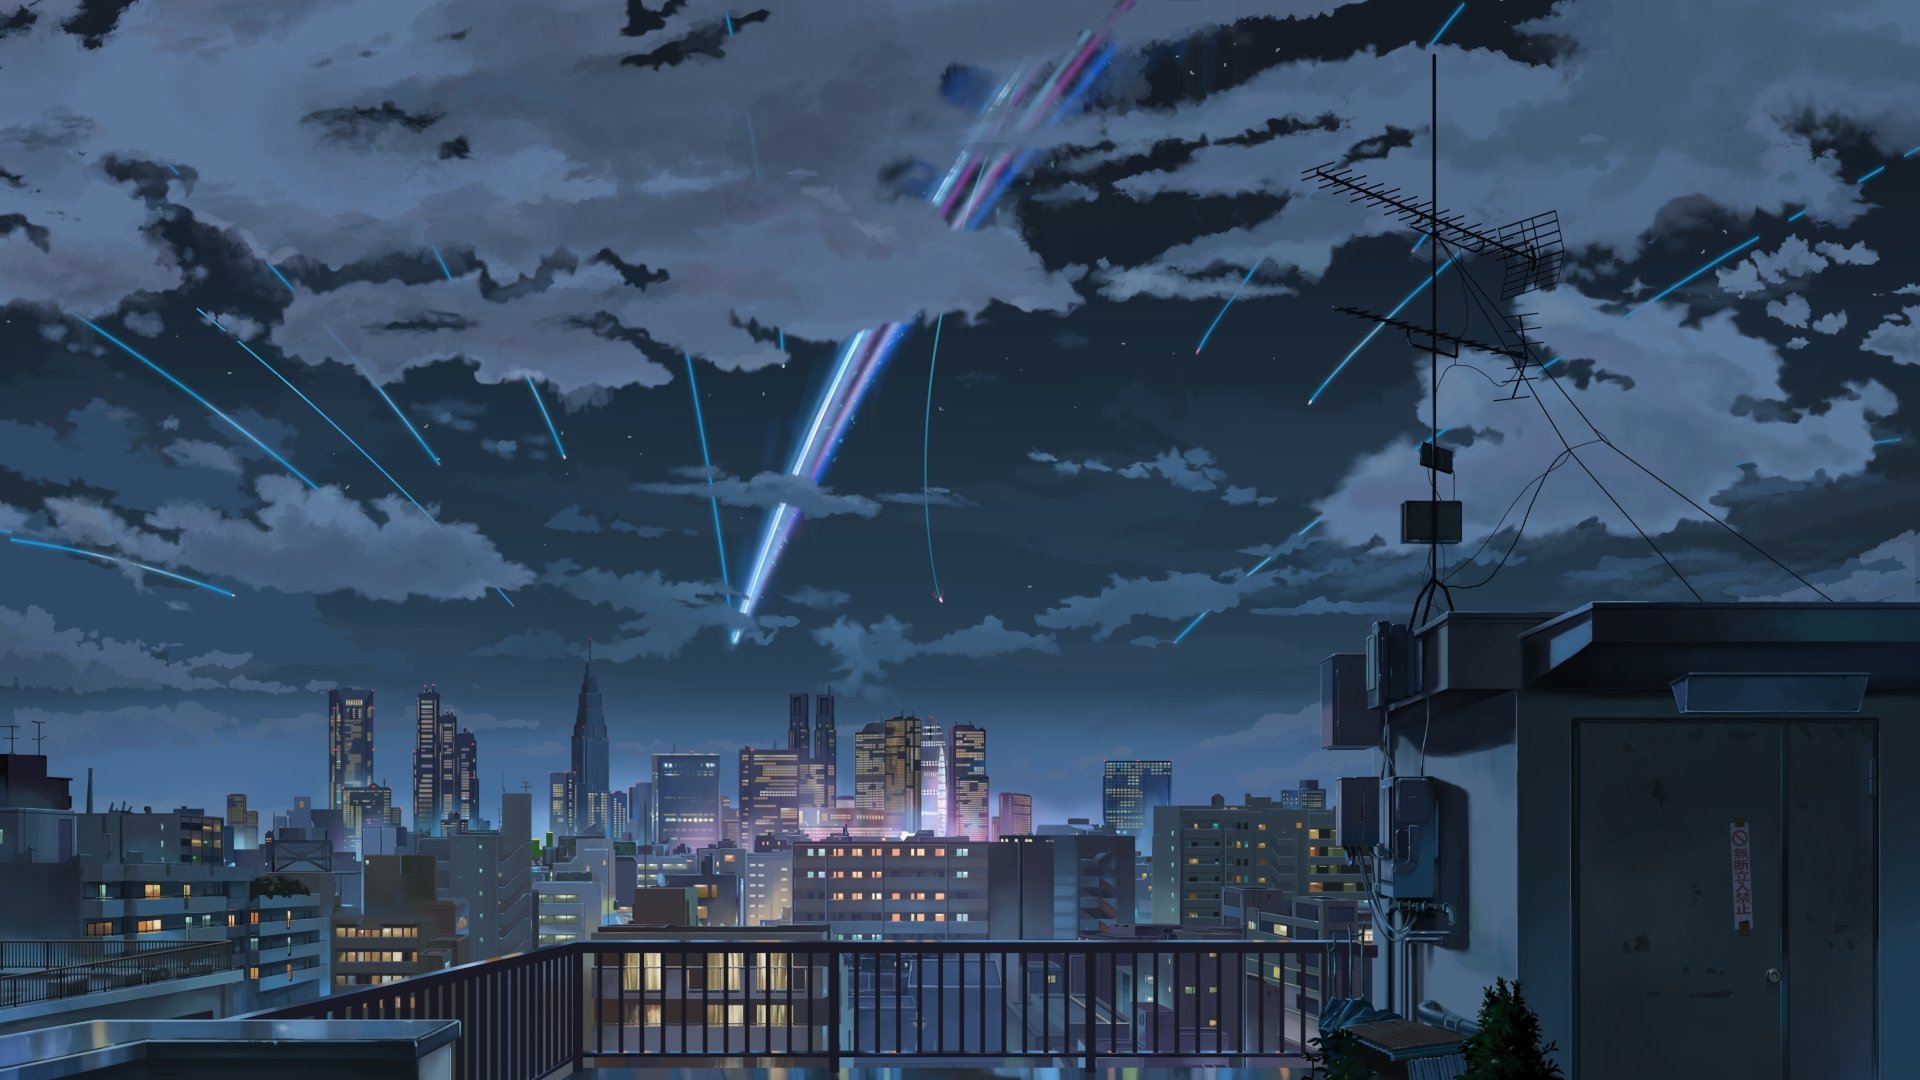 1358 Your Name. HD Wallpapers | Background Images - Wallpaper Abyss